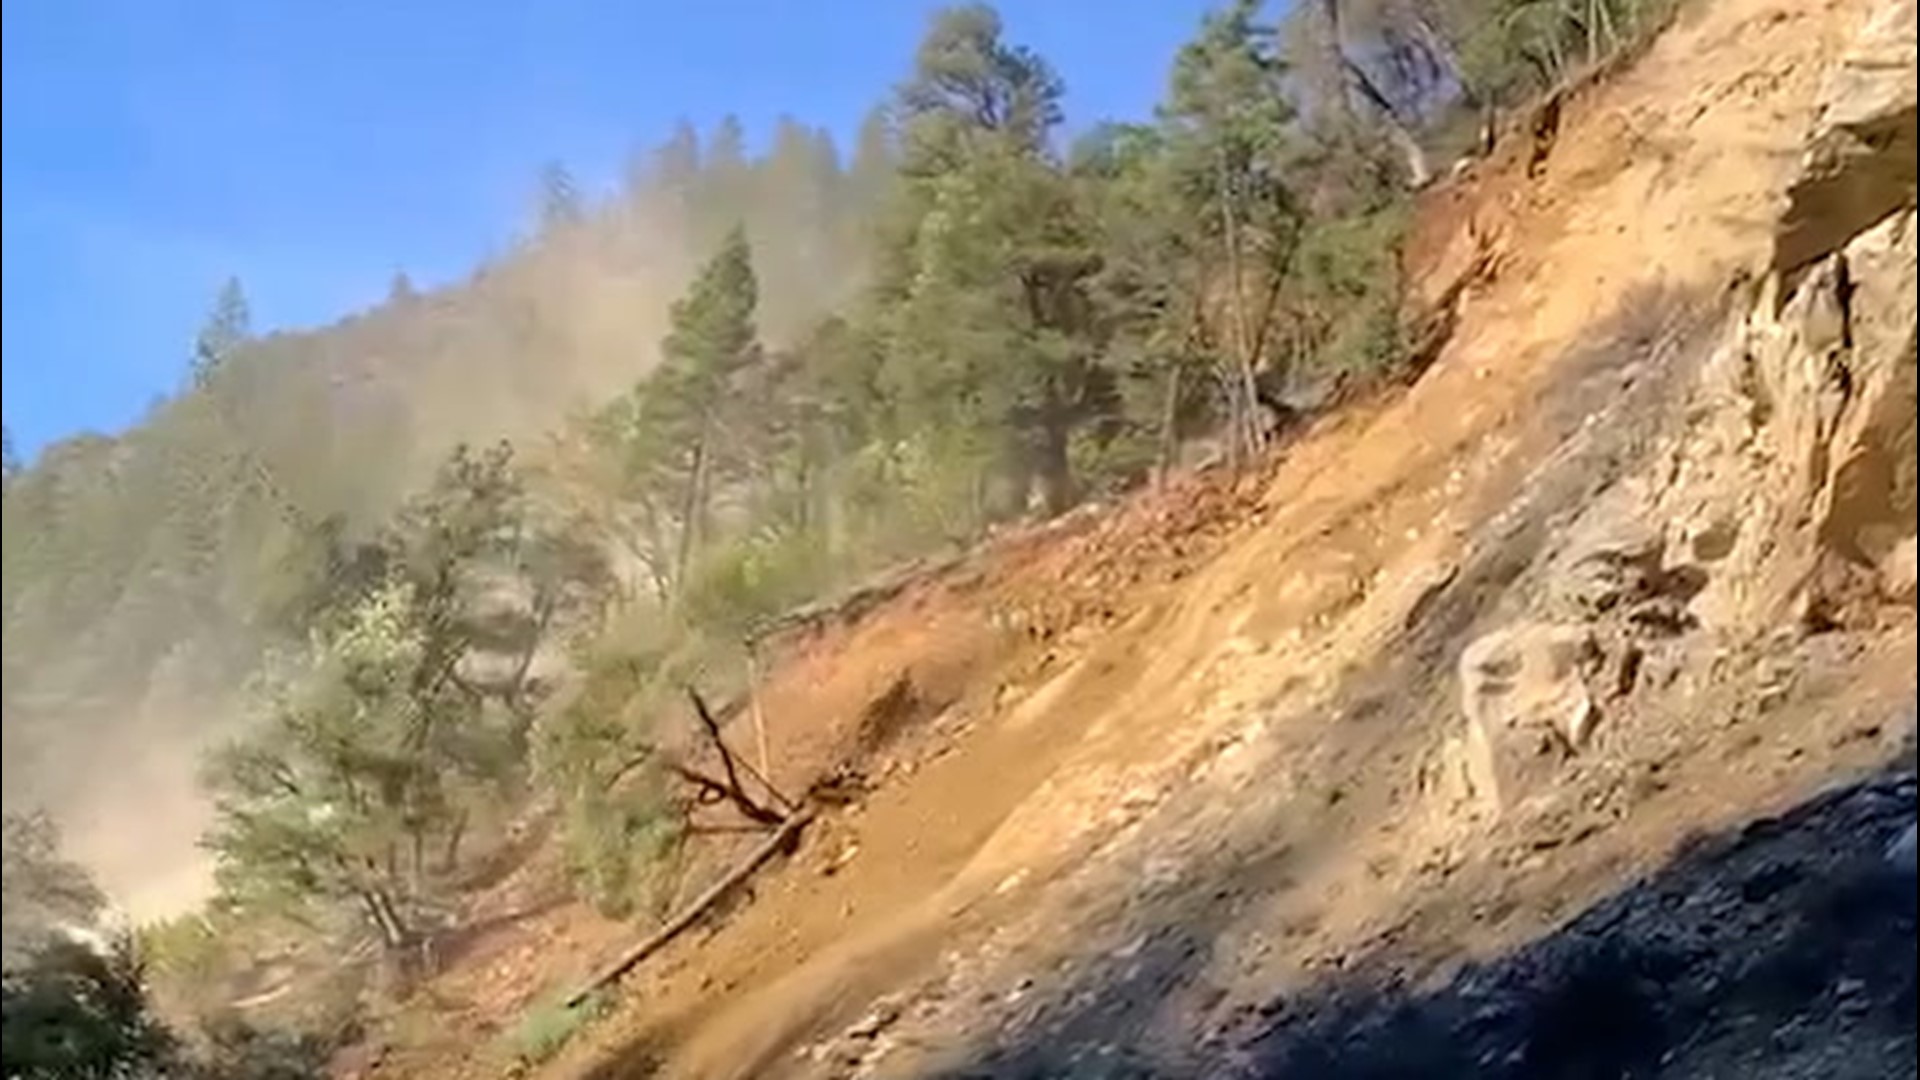 Rocks and trees tumble as landslide covers a California highway